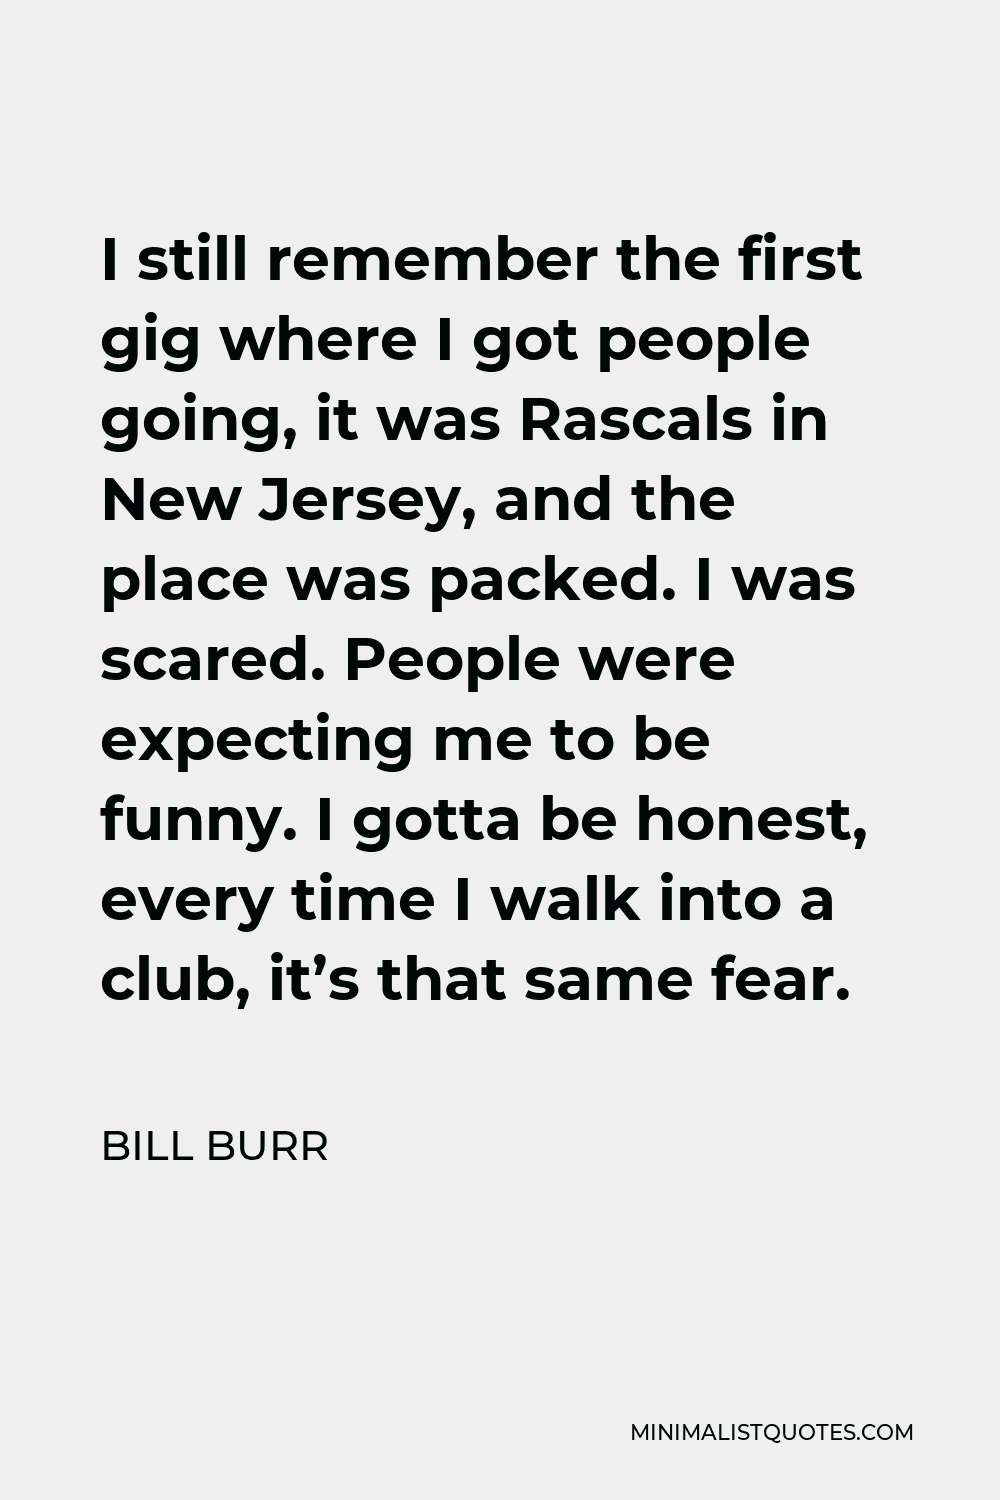 Bill Burr Quote - I still remember the first gig where I got people going, it was Rascals in New Jersey, and the place was packed. I was scared. People were expecting me to be funny. I gotta be honest, every time I walk into a club, it’s that same fear.